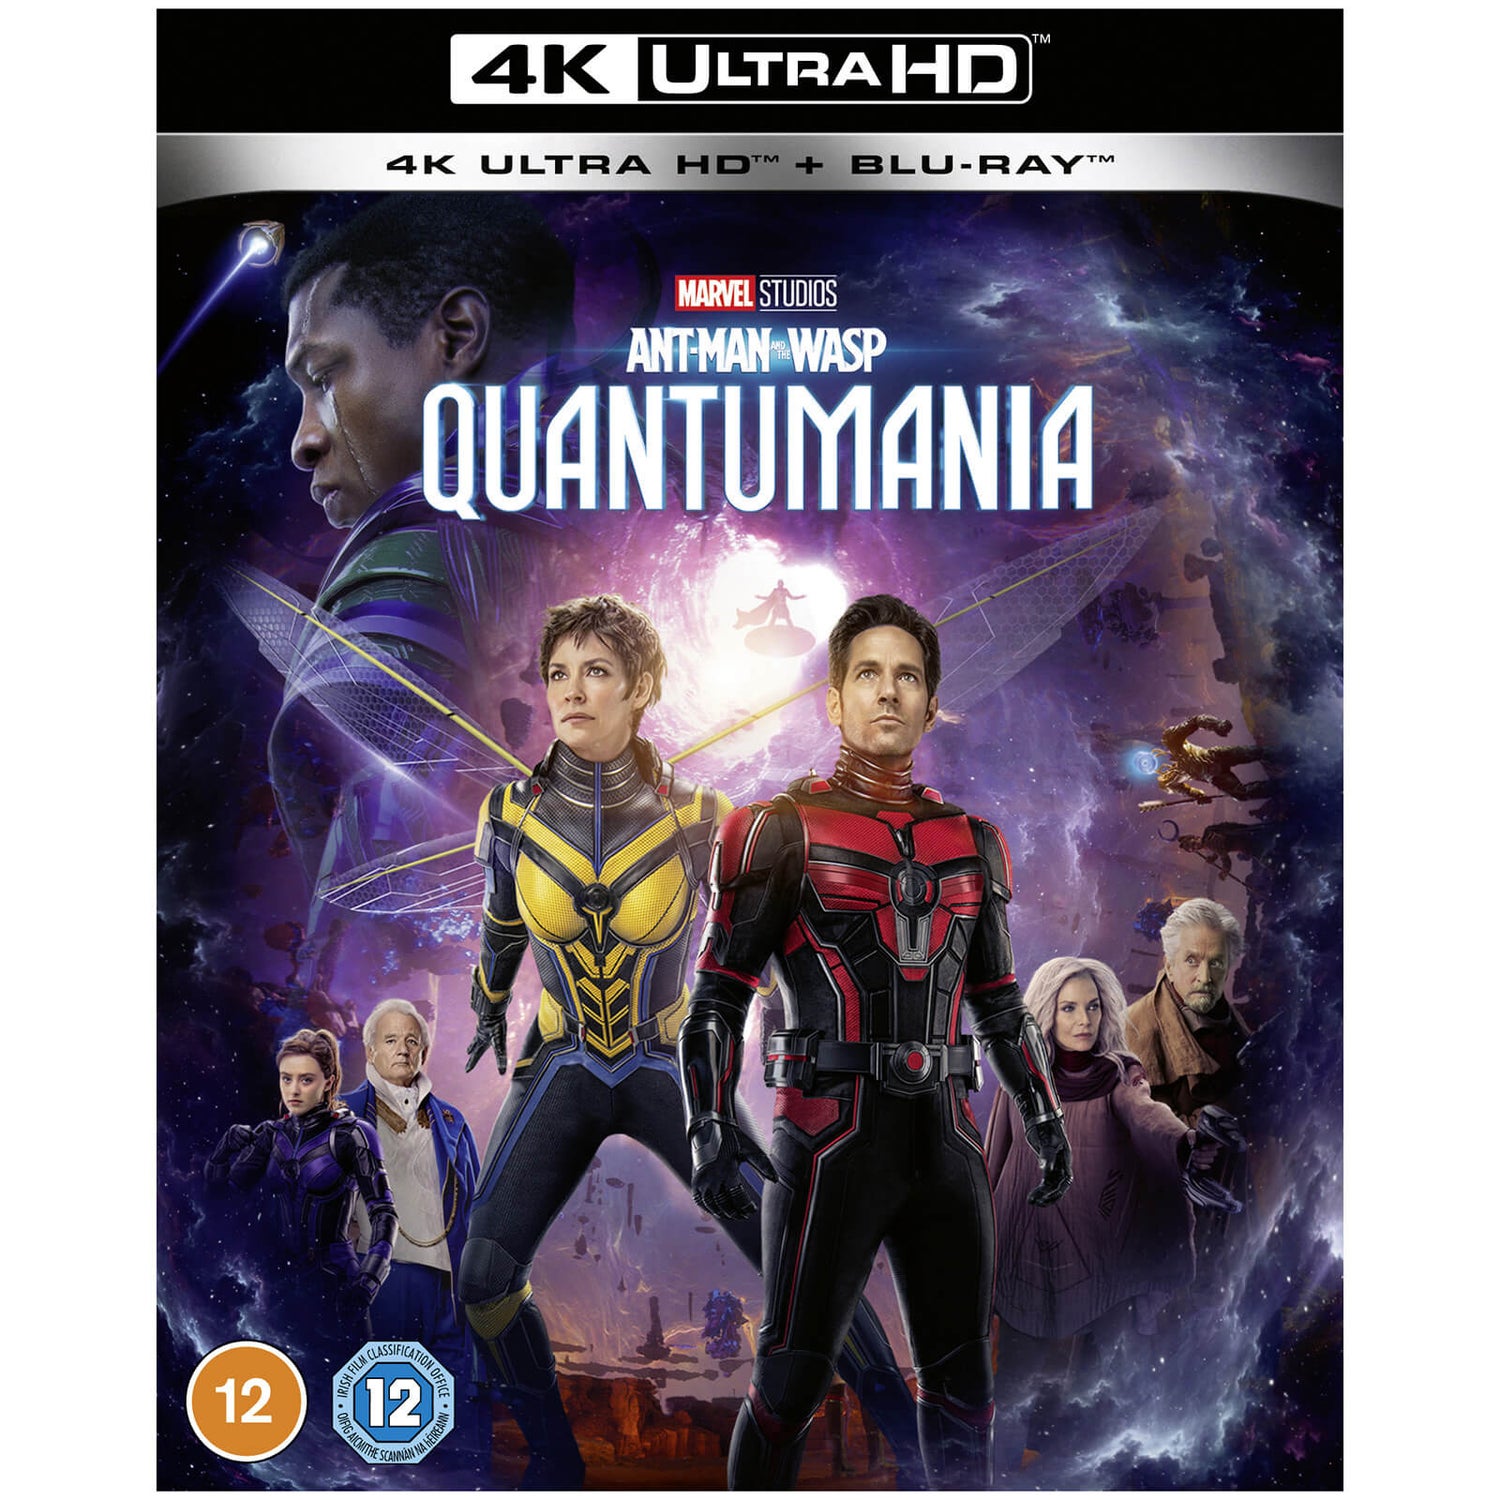 Marvel Studios Ant Man and The Wasp Quantumania 4K Ultra HD (includes Blu-ray)